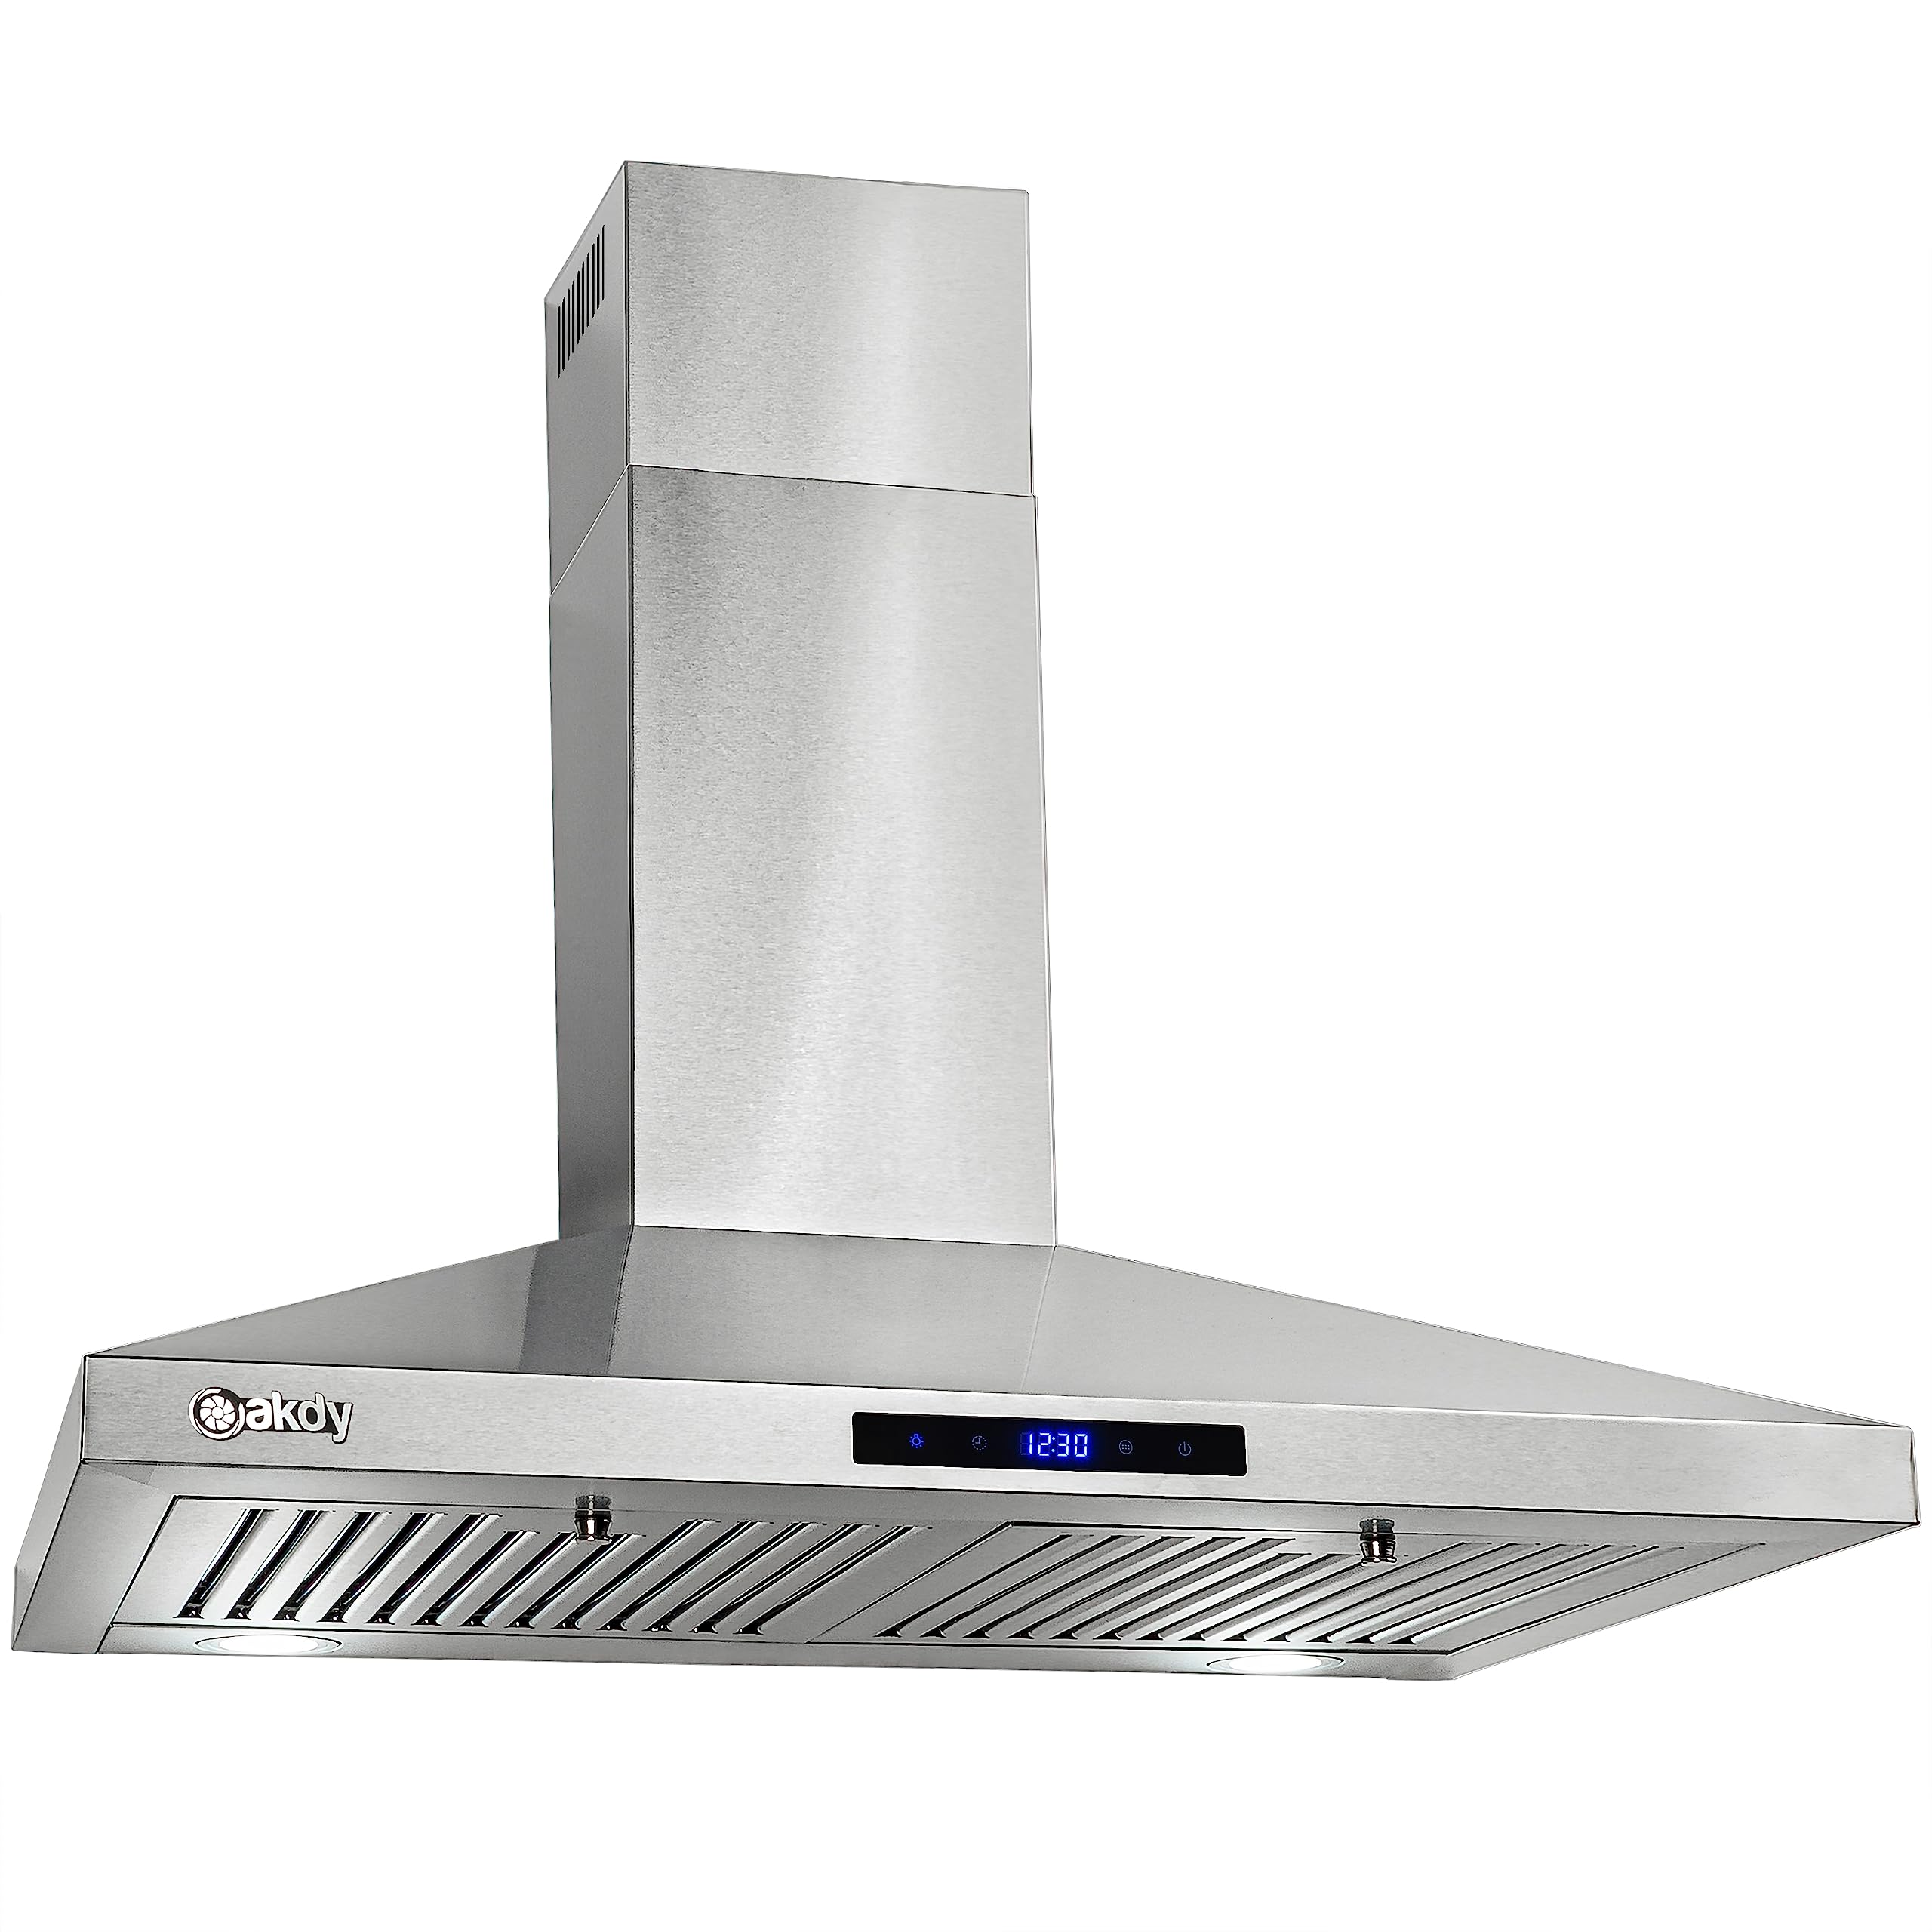 AKDY 30 in. Wall Mount Range Hood, 3-Speed Fan and LED Lights in Stainless Steel, Convertible Range Hood Ducted to Ductless with 2-Sets of Carbon Filters